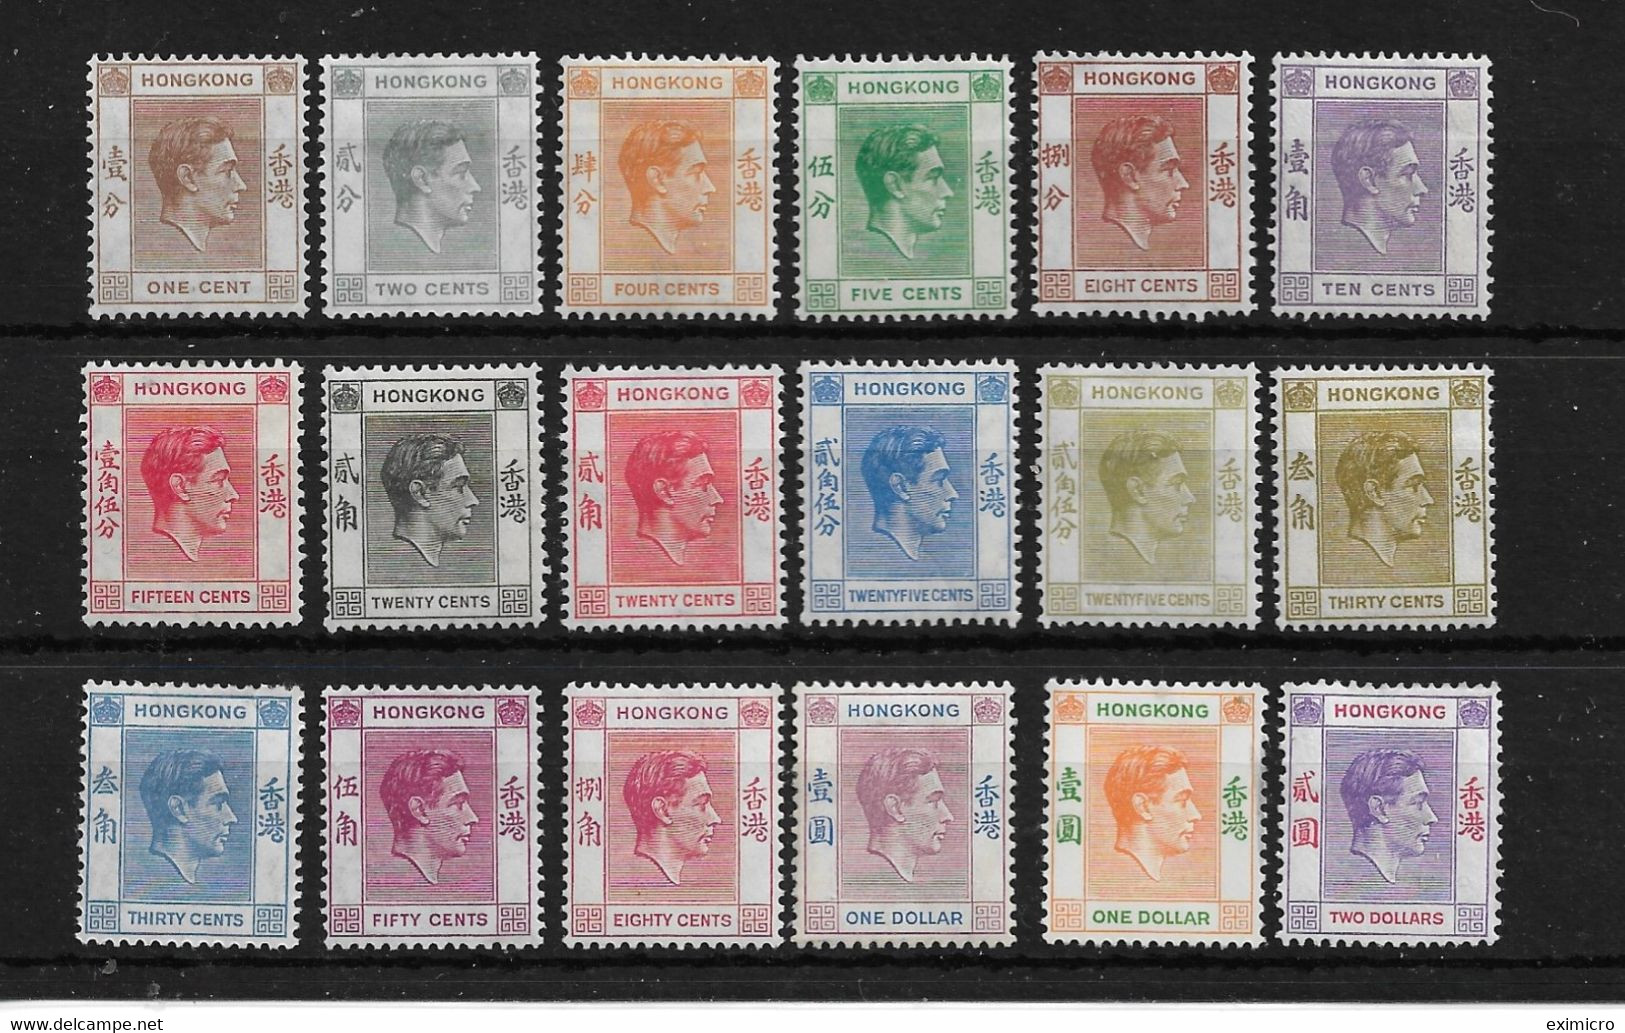 HONG KONG 1938 - 1952 SET TO $2 REDDISH VIOLET AND SCARLET (ex $2 Red-orange And Green) SG 140a/158 (ex SG 157) MM - Unused Stamps